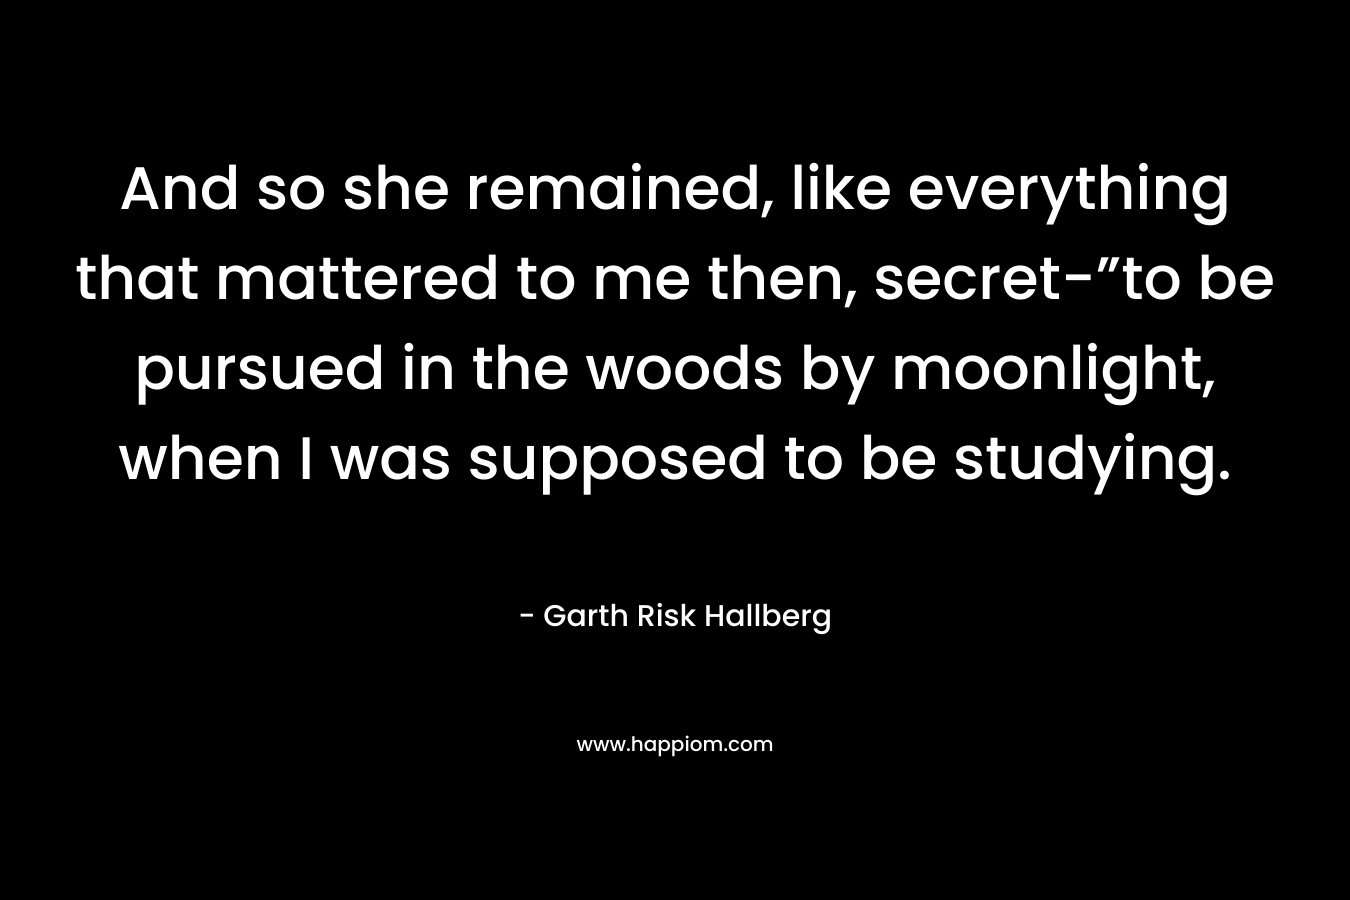 And so she remained, like everything that mattered to me then, secret-”to be pursued in the woods by moonlight, when I was supposed to be studying. – Garth Risk Hallberg